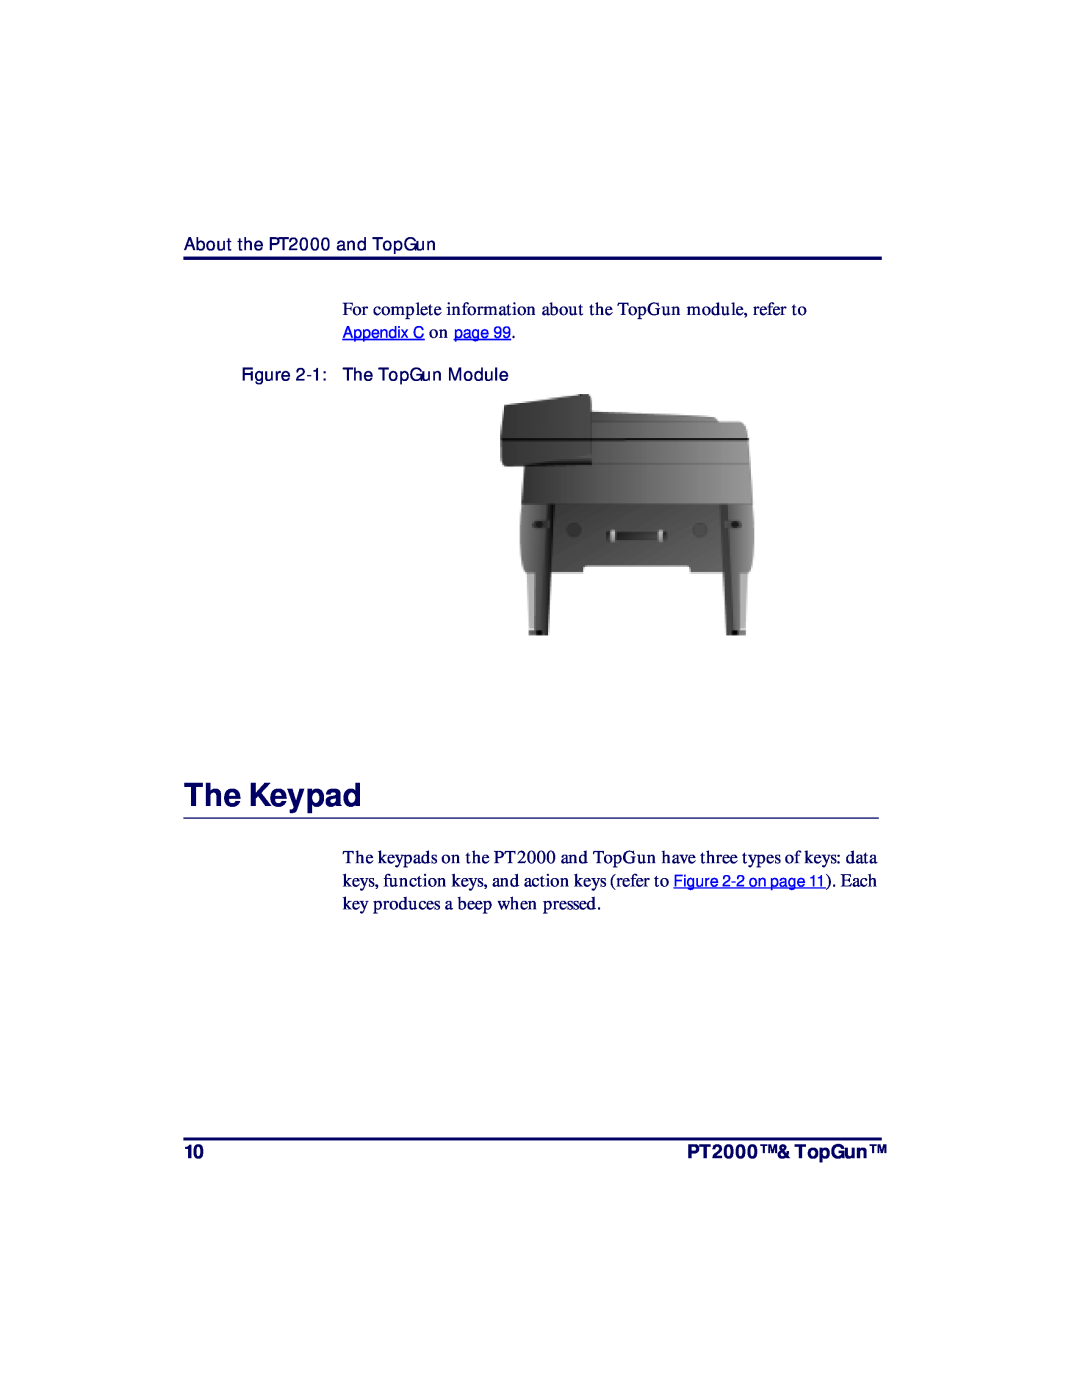 PSC manual The Keypad, For complete information about the TopGun module, refer to, PT2000 & TopGun, 1 The TopGun Module 